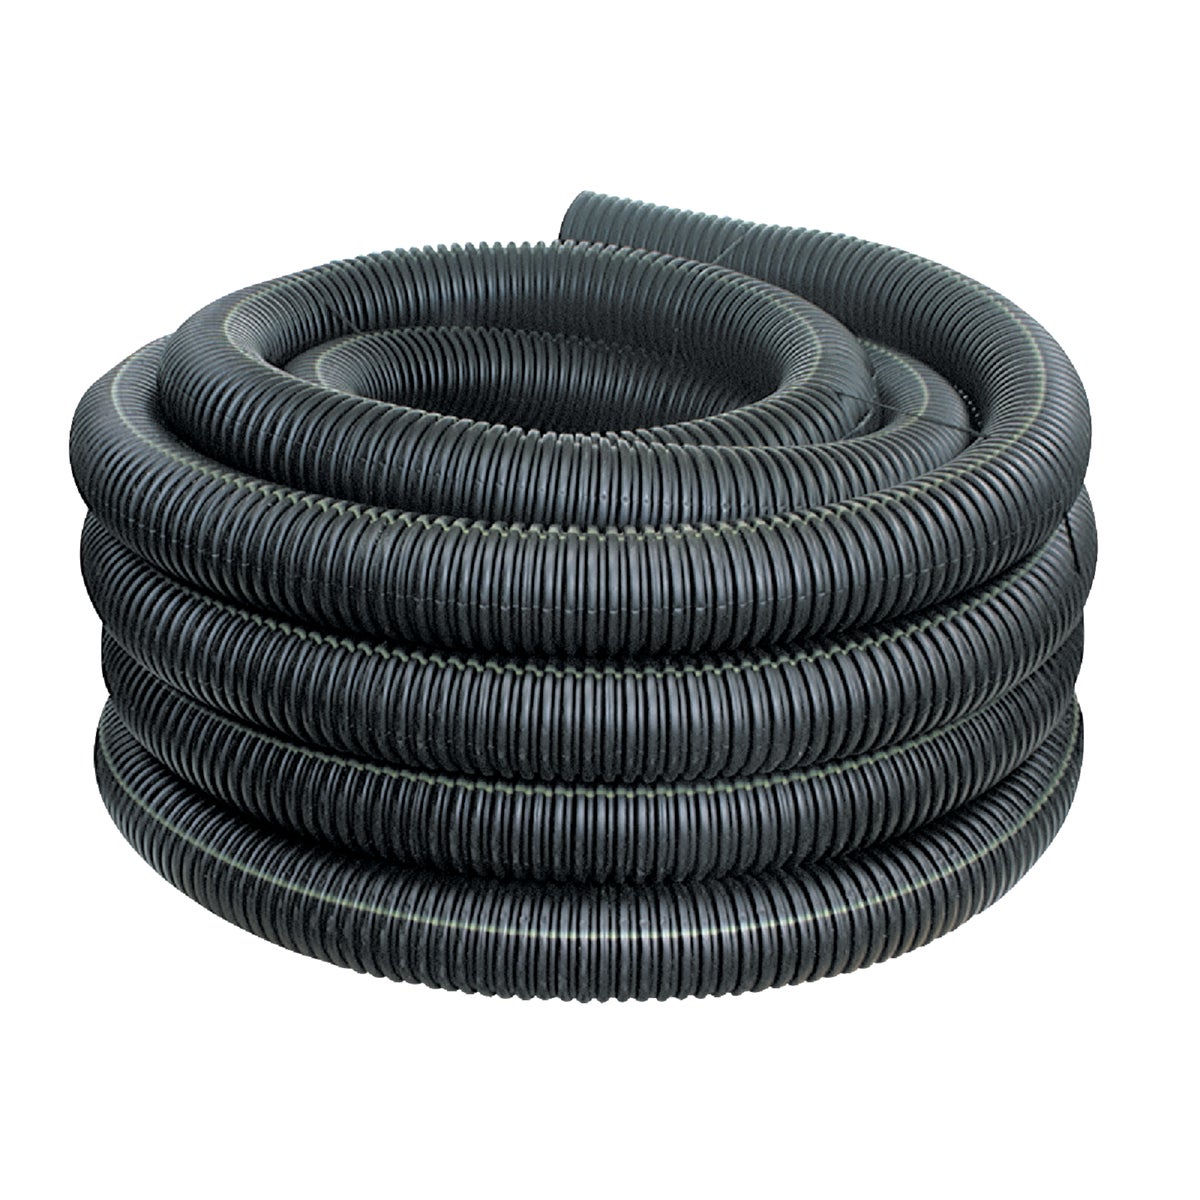 Advanced Drainage Systems 4 In. X 100 Ft. Corrugated Solid Drainage Pipe